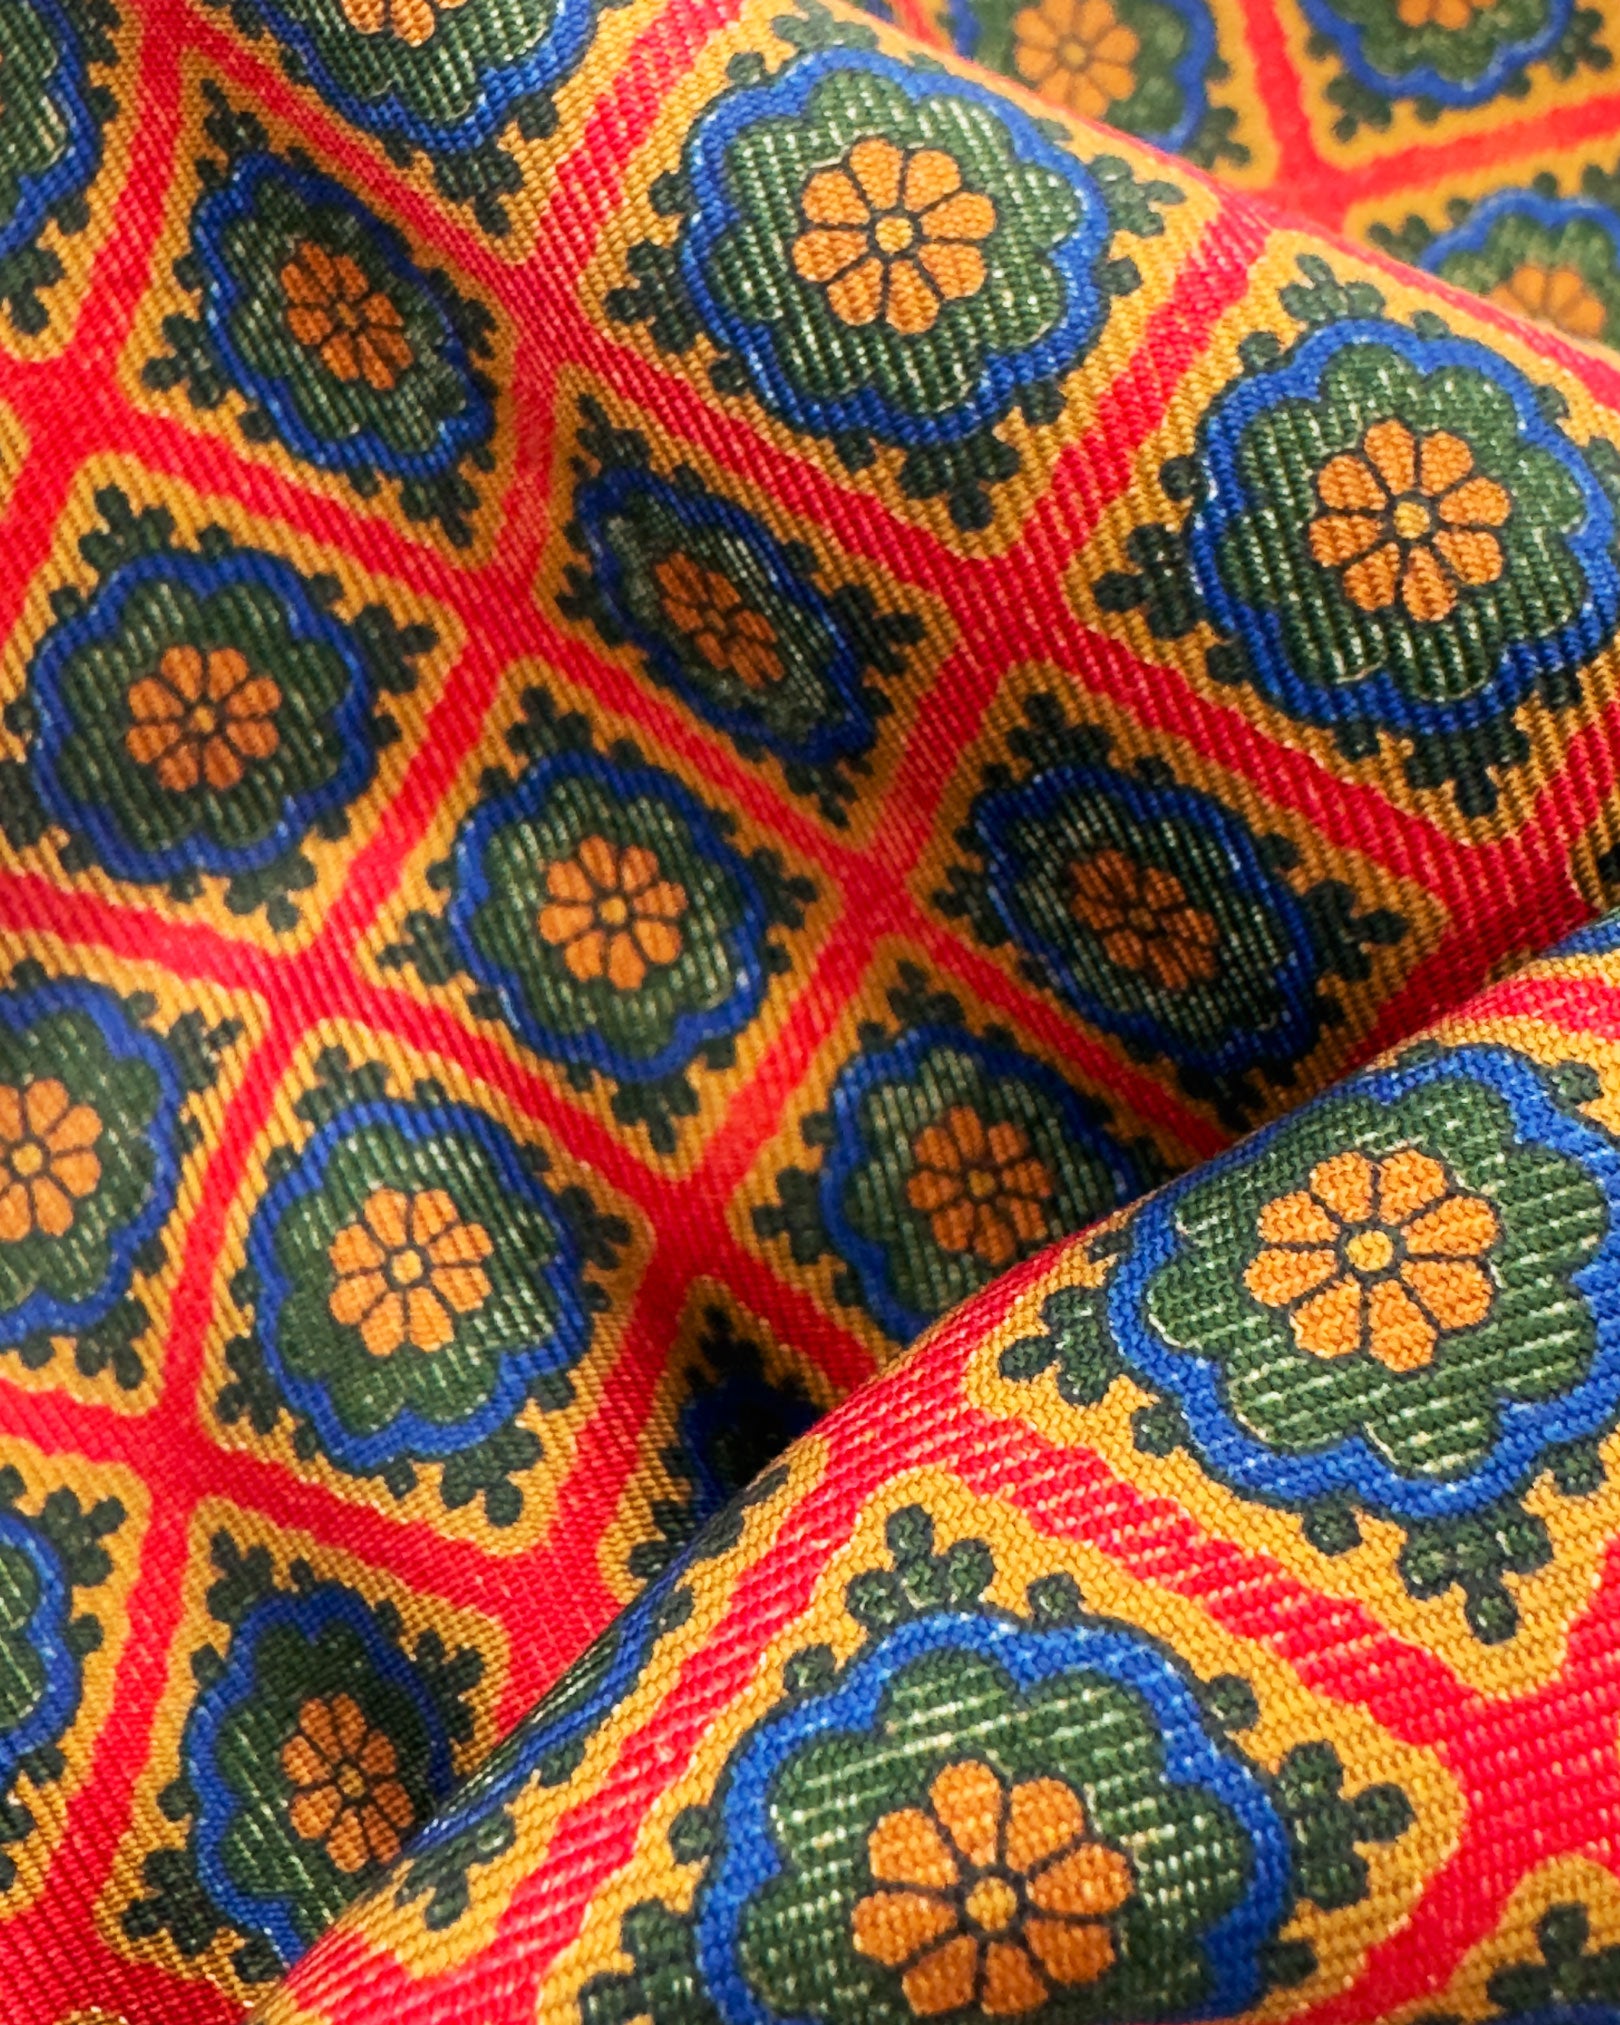 A ruffled close-up of the 'Bolsover' pocket square, presenting a closer view of the multicoloured floral grids against the attractive lustre of the deadstock silk material. 